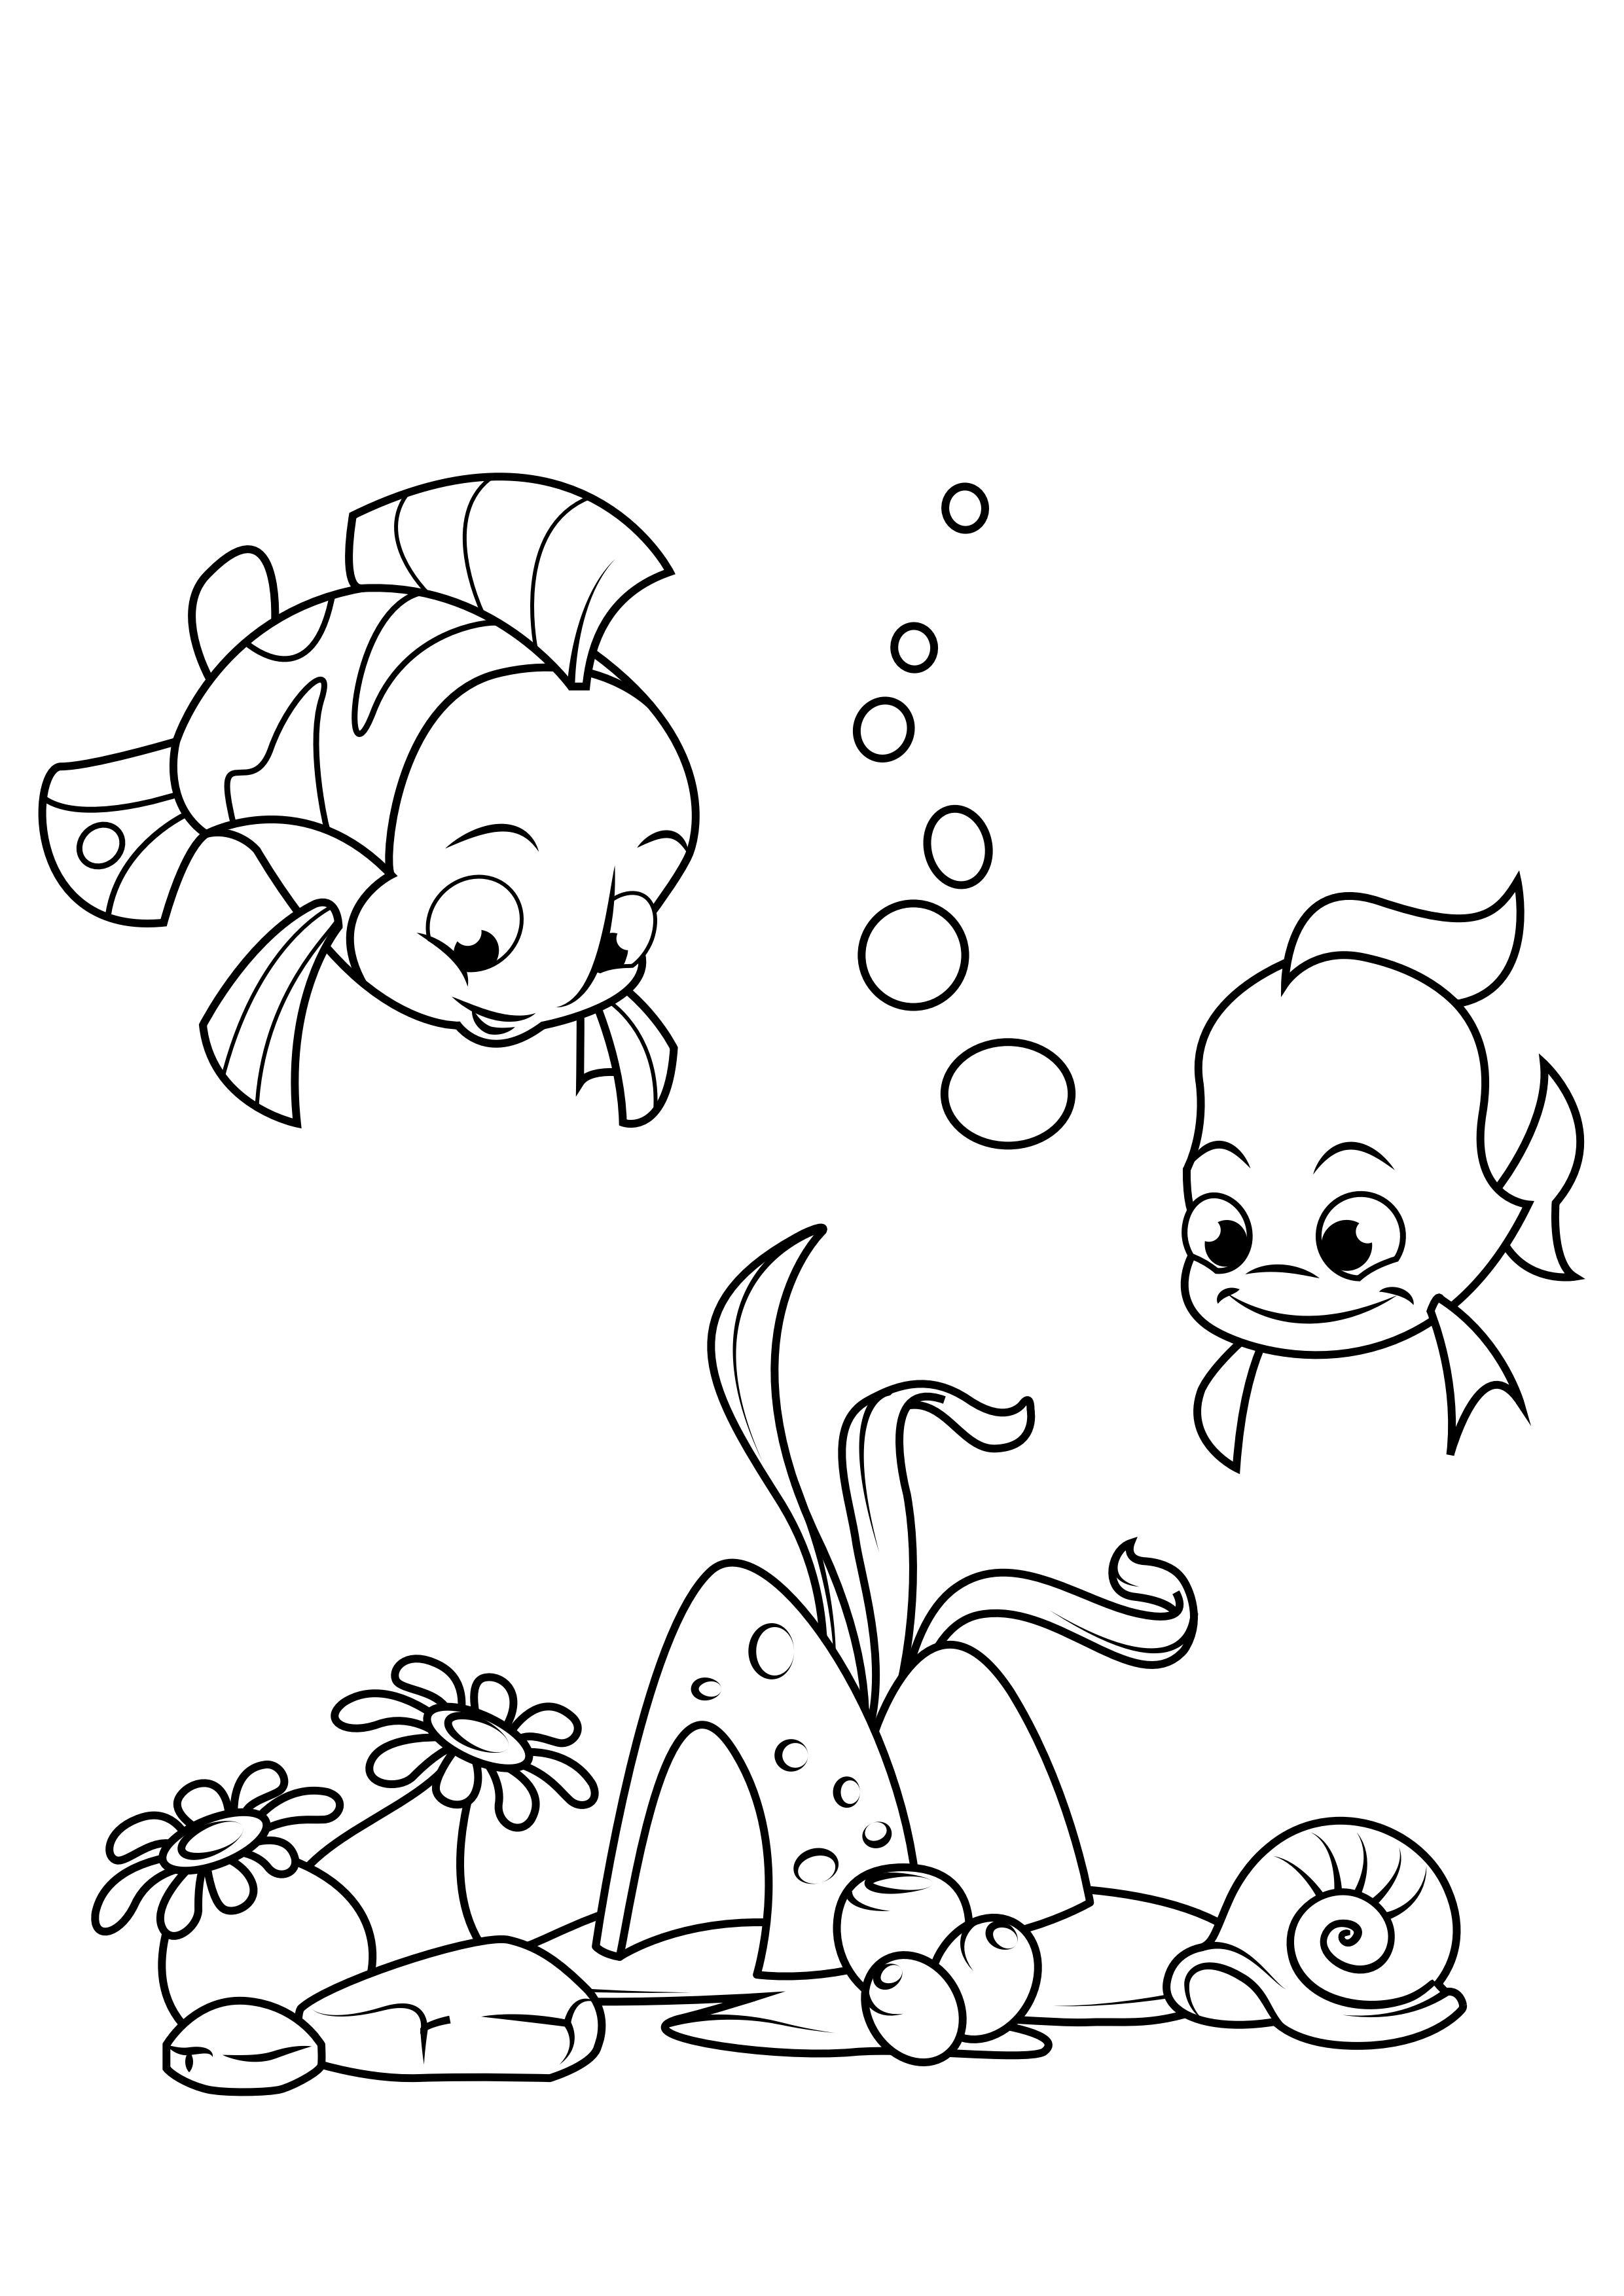 Coloring page fish in the sea